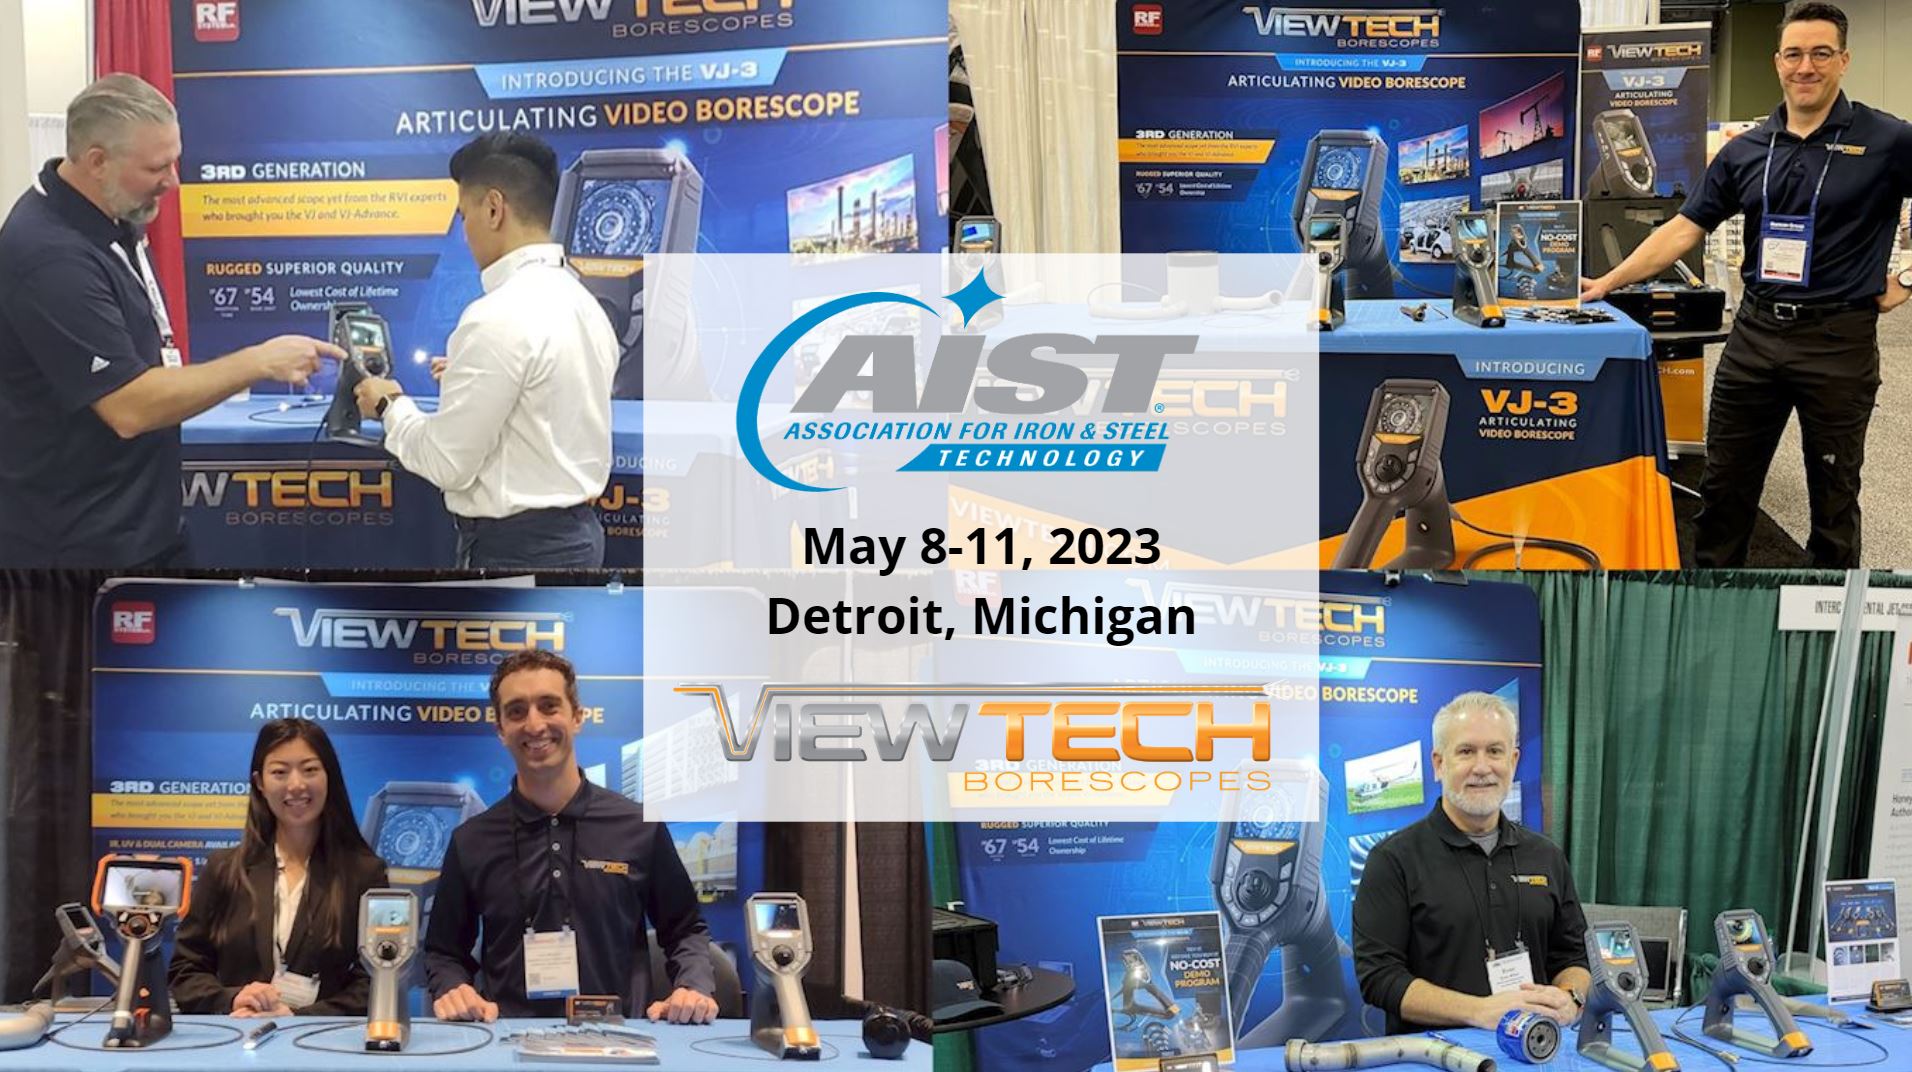 AISTech 2023 The Iron & Steel Technology Conference and Exposition